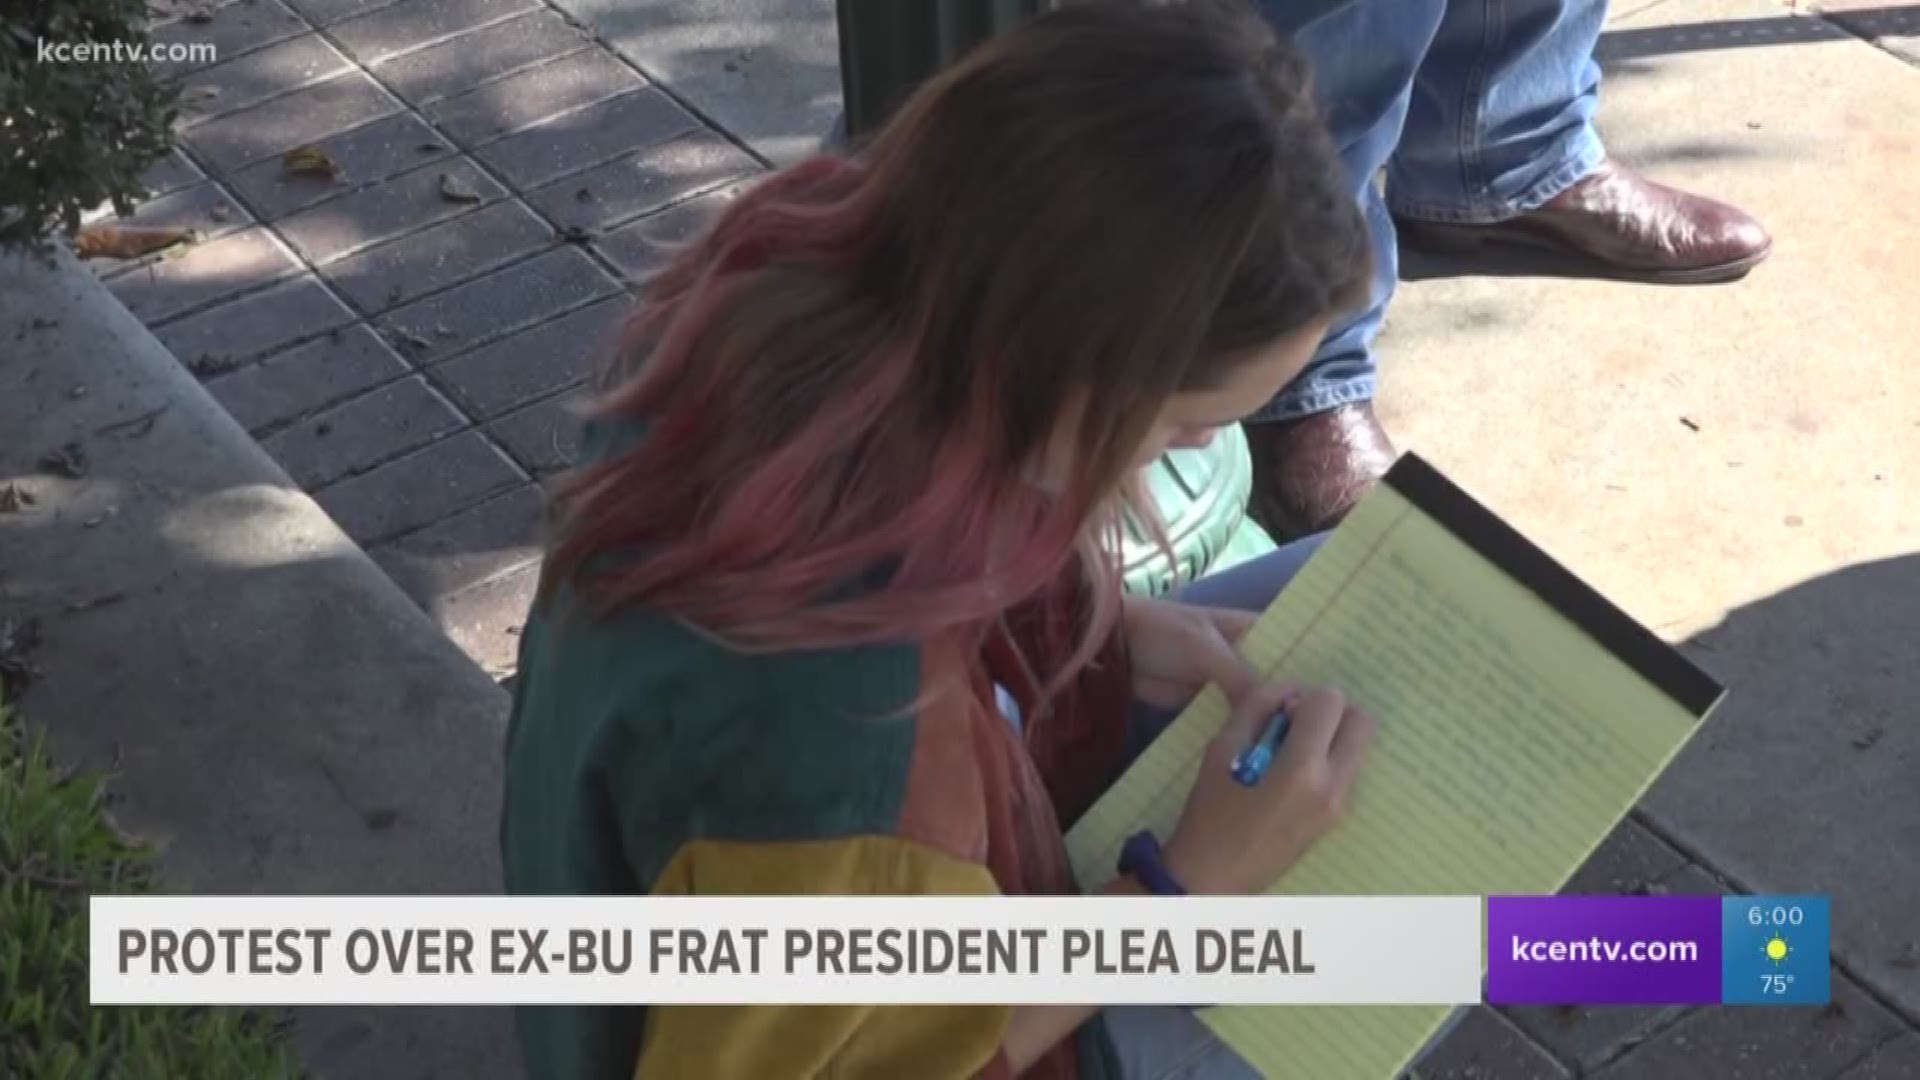 A group in Waco protested outside the McLennan County Courthouse Thursday to ask the county judge to overturn a plea deal offered to a former Baylor fraternity president accused of raping a fellow student.